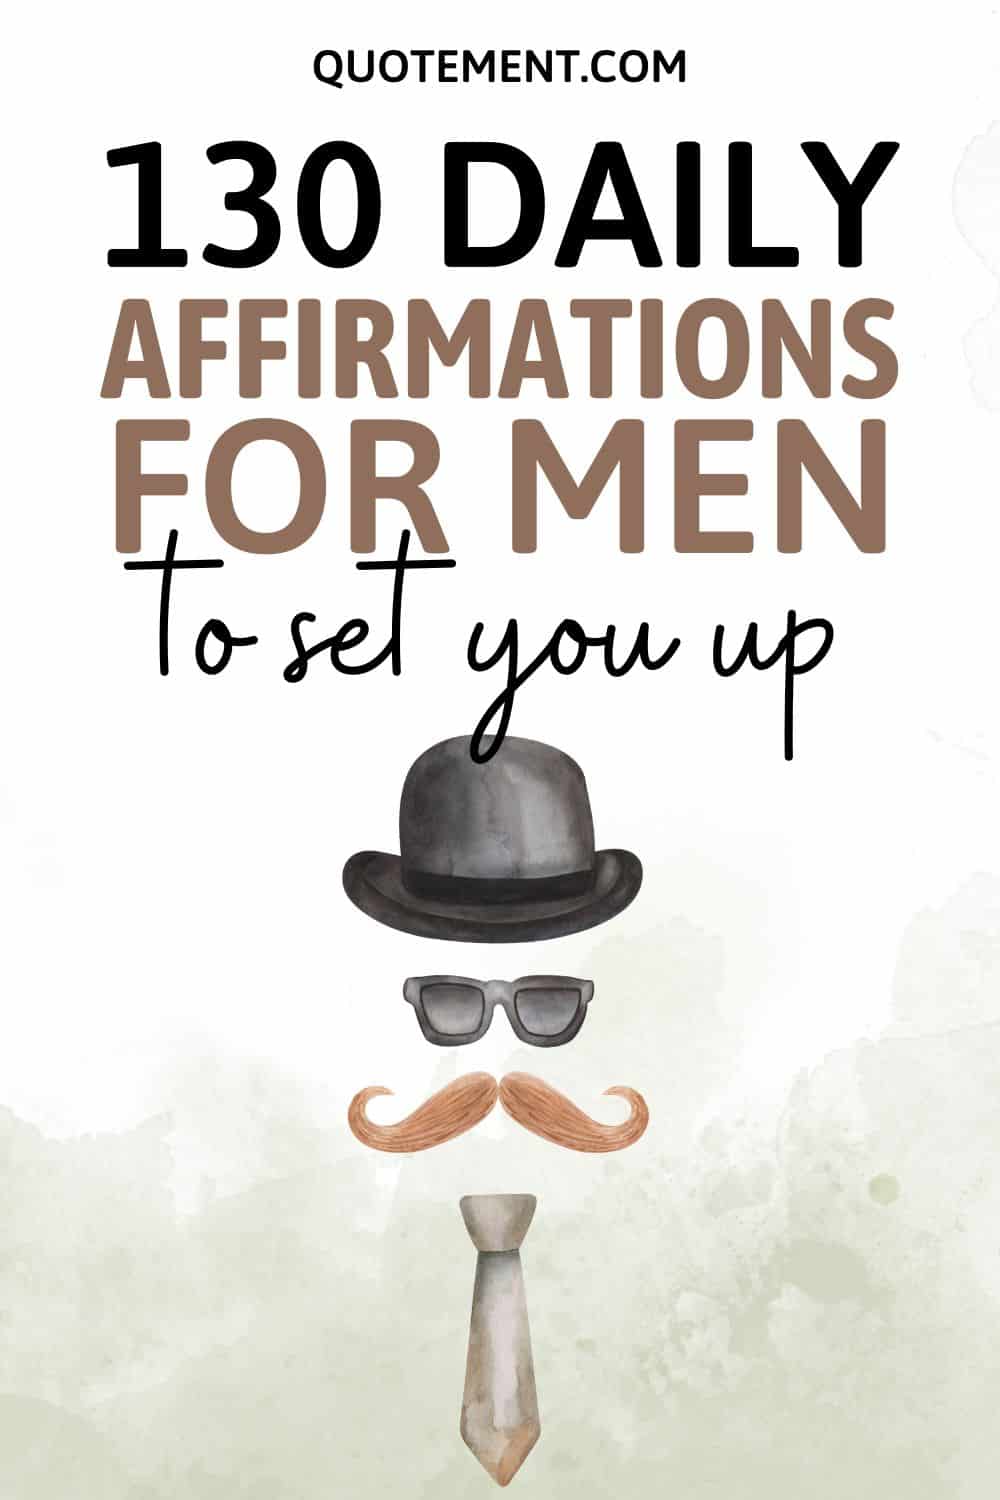 130 Daily Affirmations For Men To Bring Growth & Success
